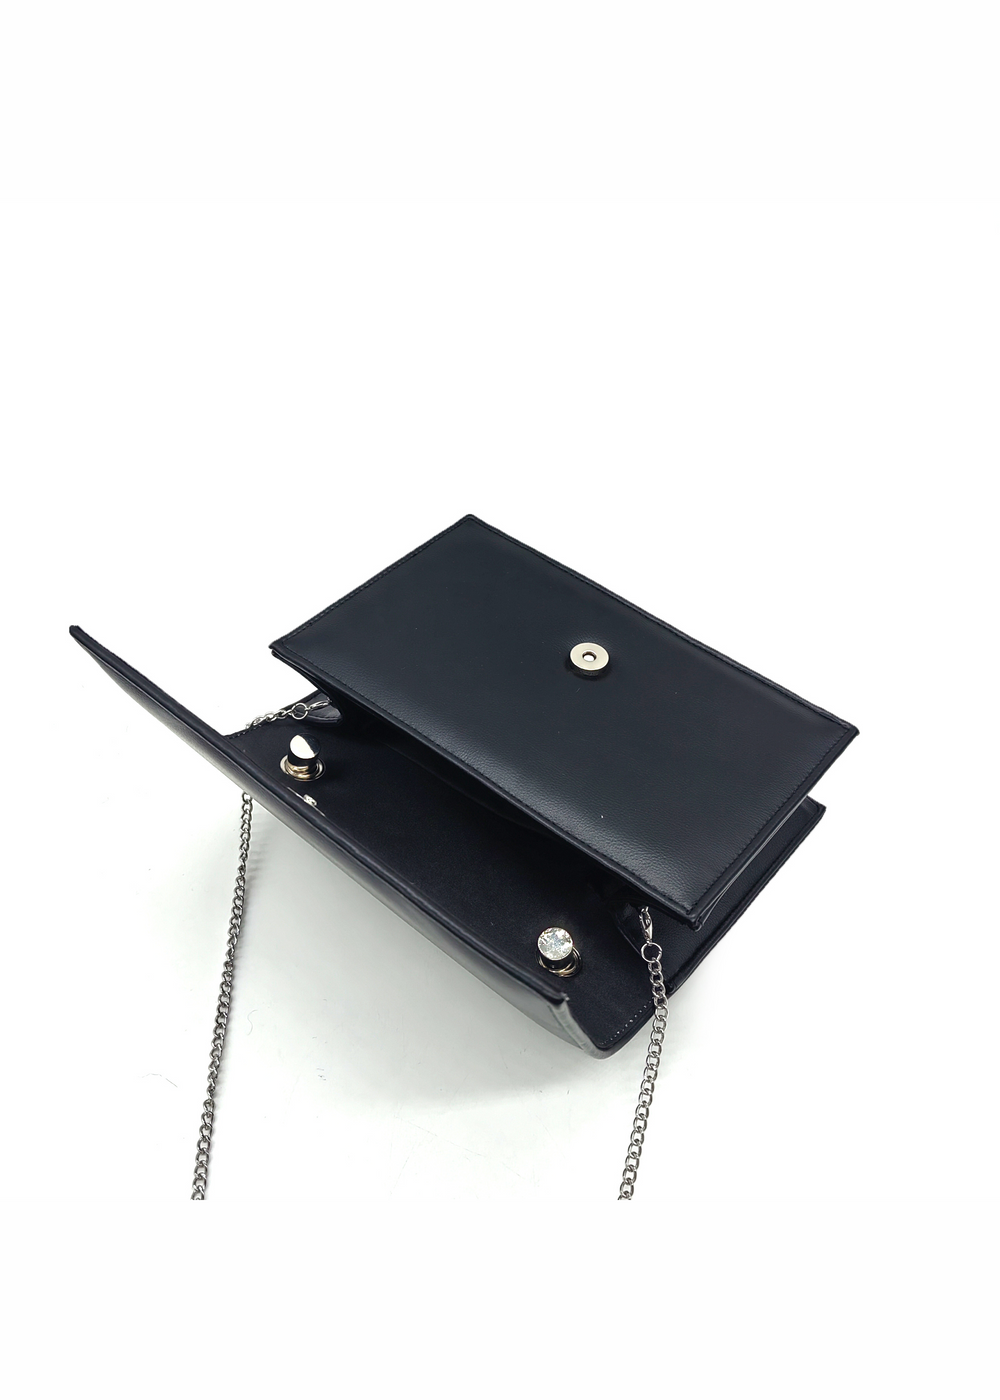 PEARL SMALL BAG WITH KNOTTED HANDLE DETAIL IN BLACK FAUX LEATHER